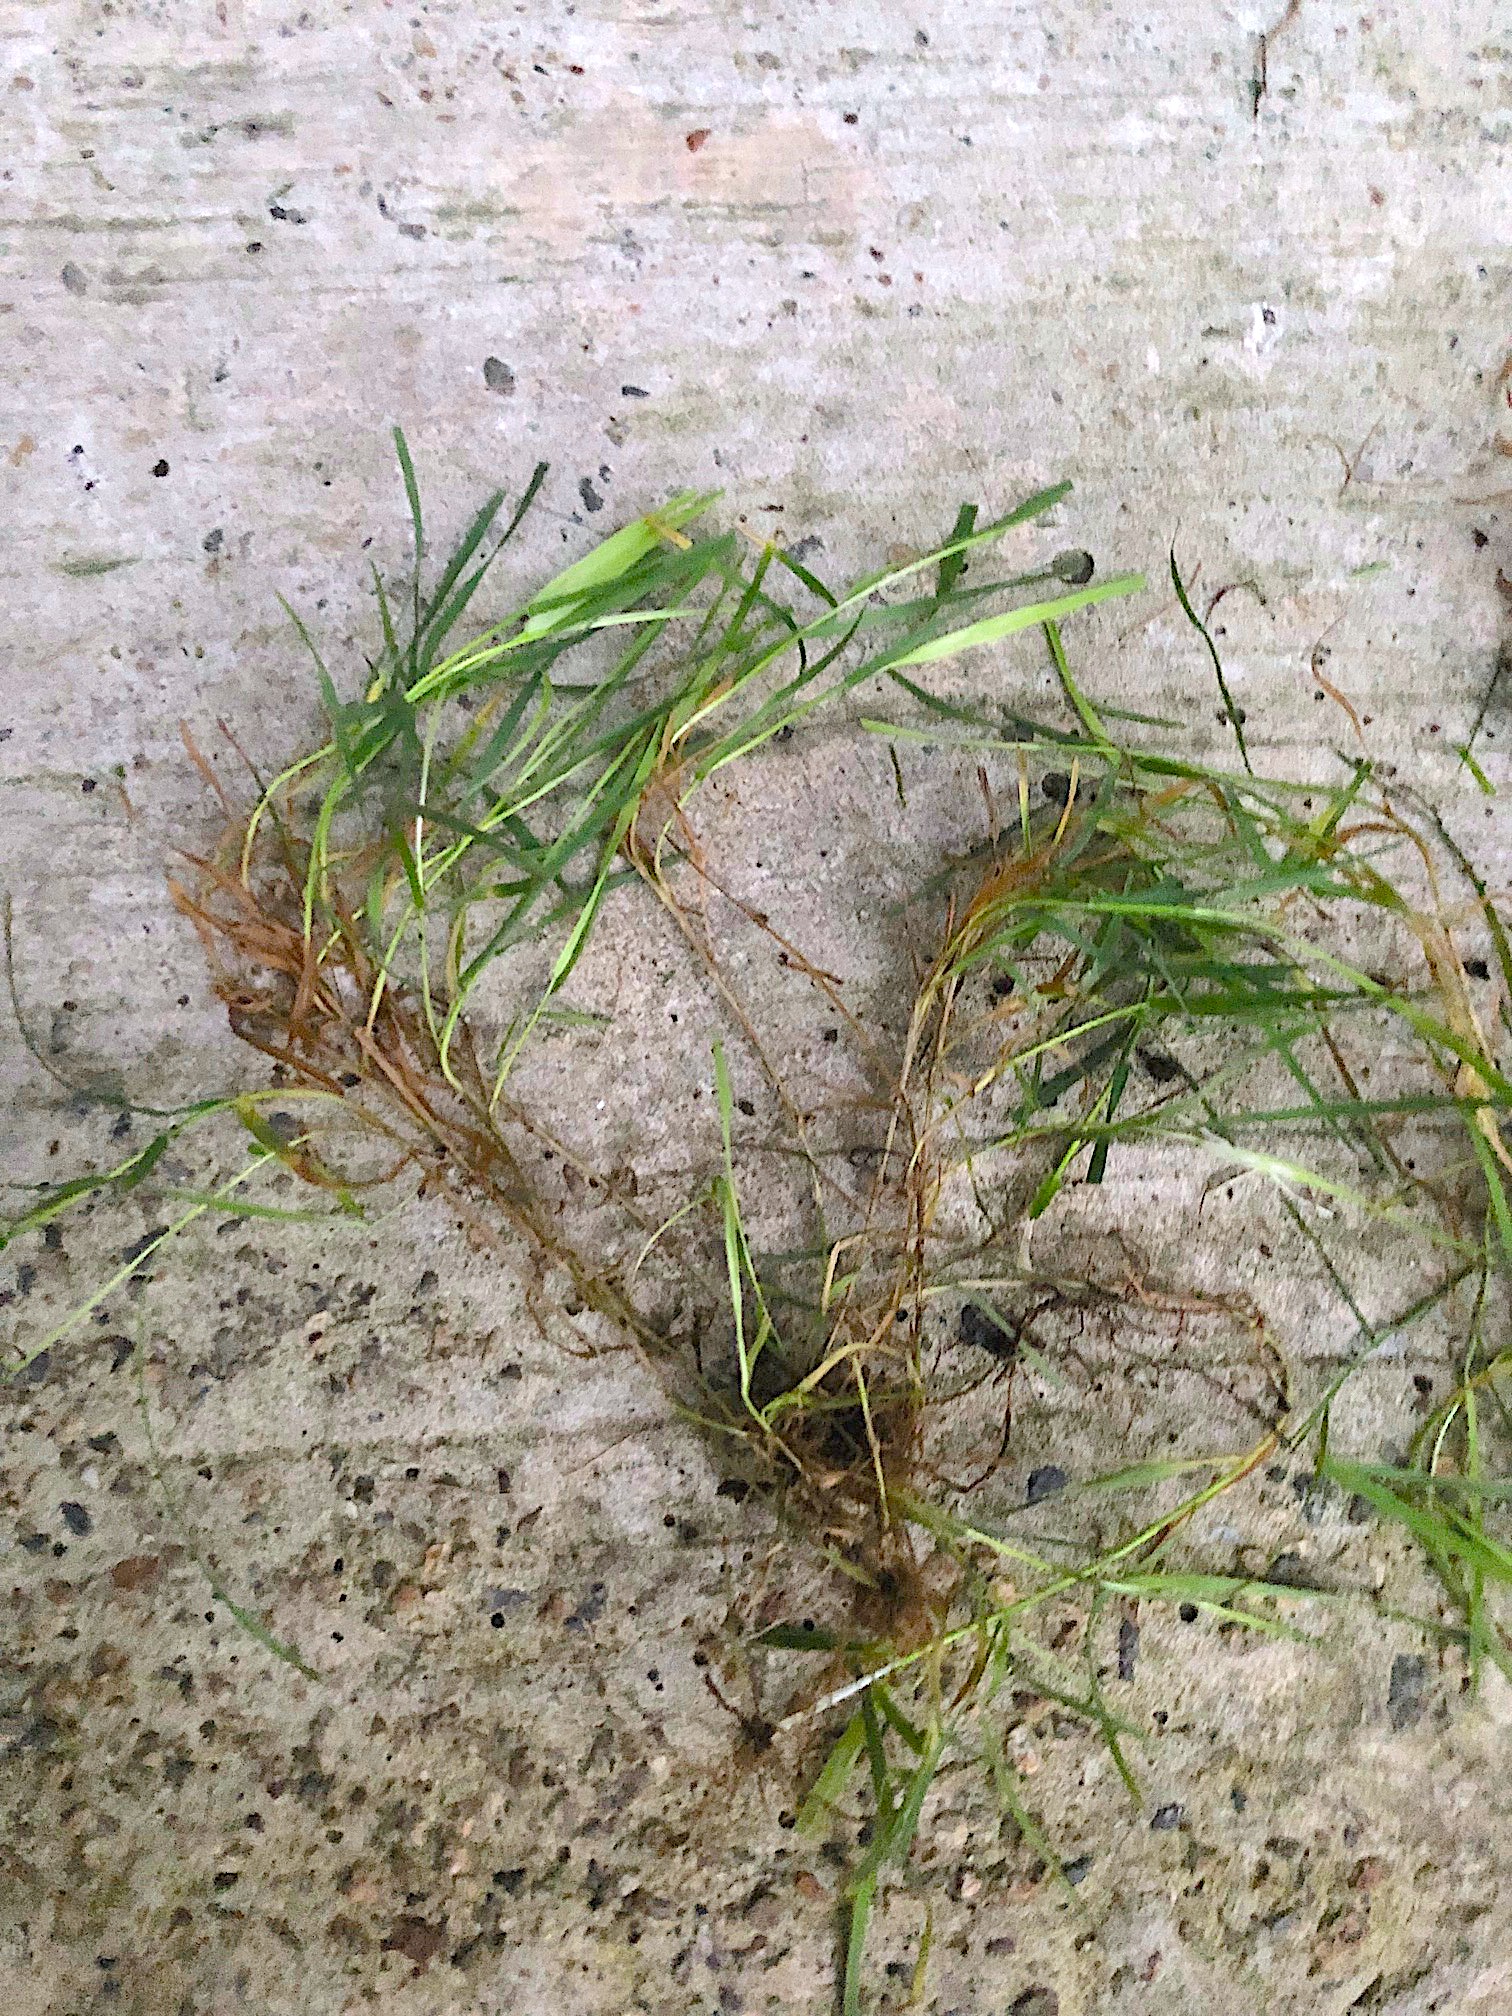 Creeping bentgrass bunch | how to get rid of bentgrass